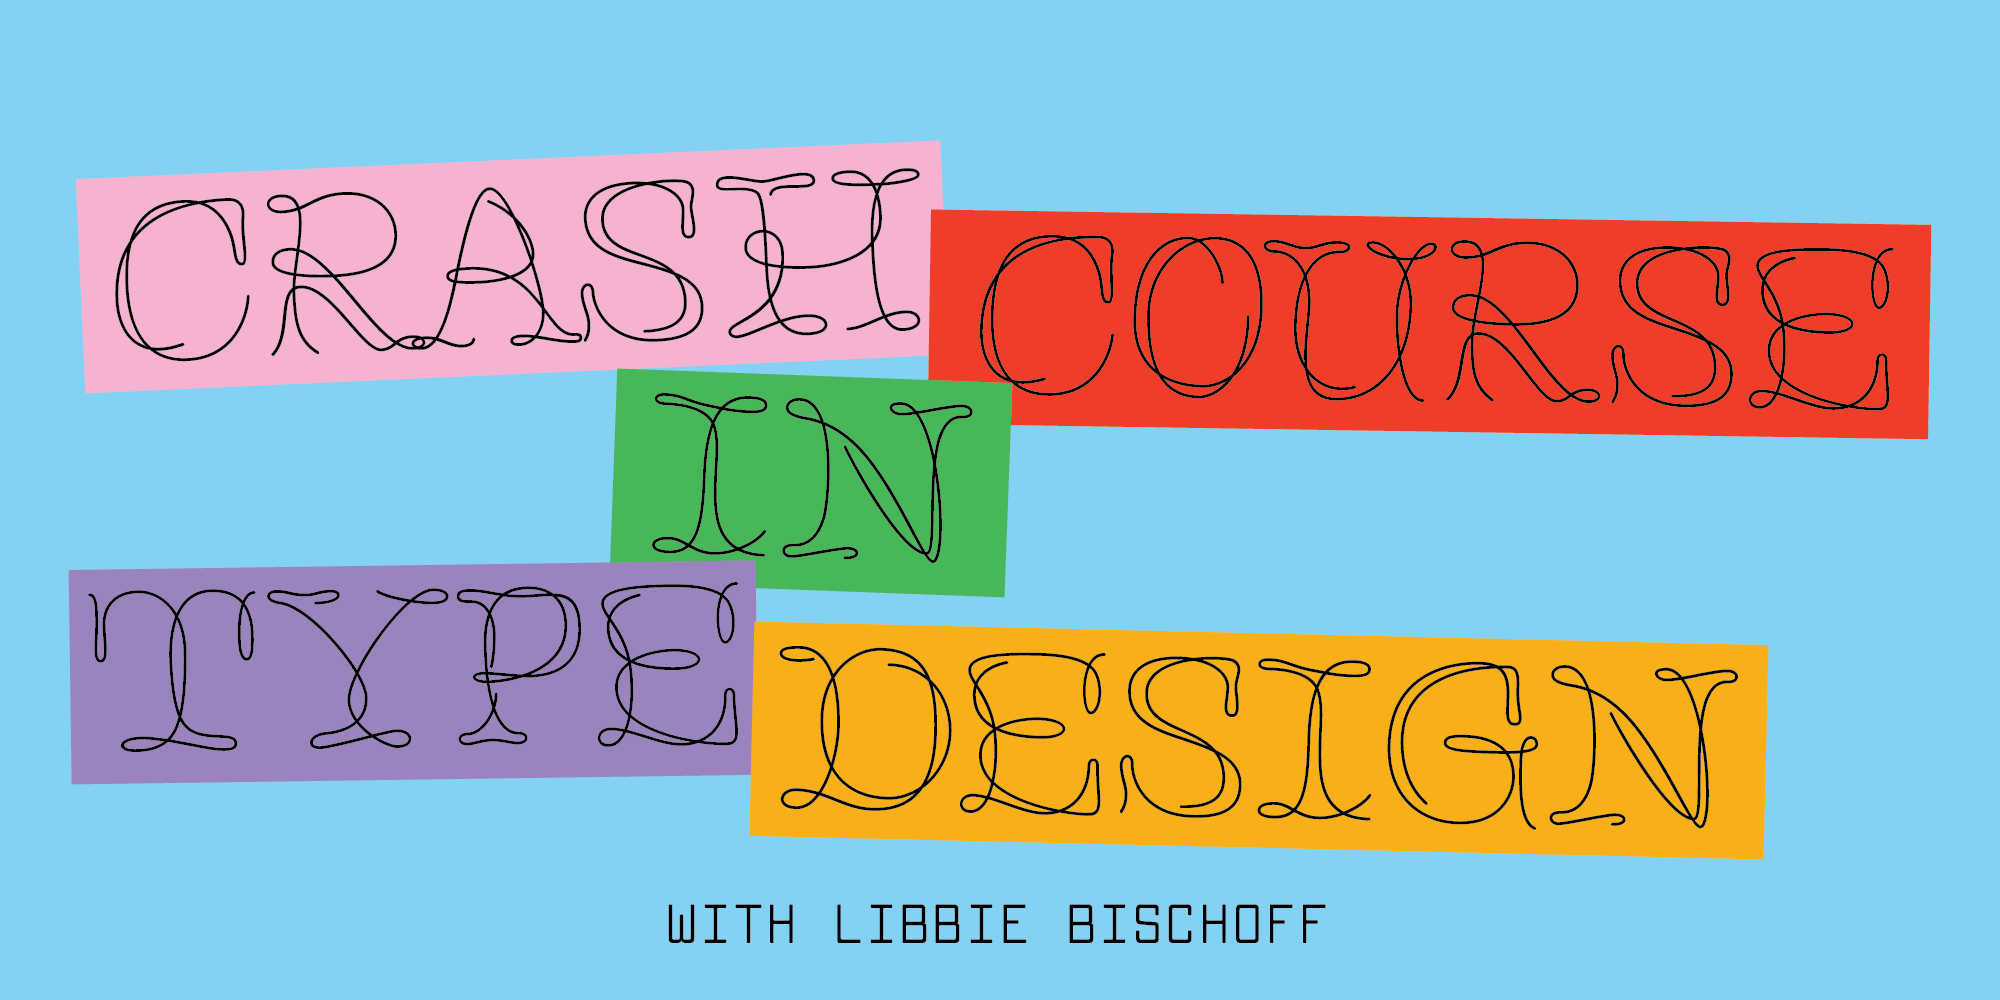 A colorful banner on sky blue that says "Crash Course In Type Design" on colorful backgrounds. Expressive typography